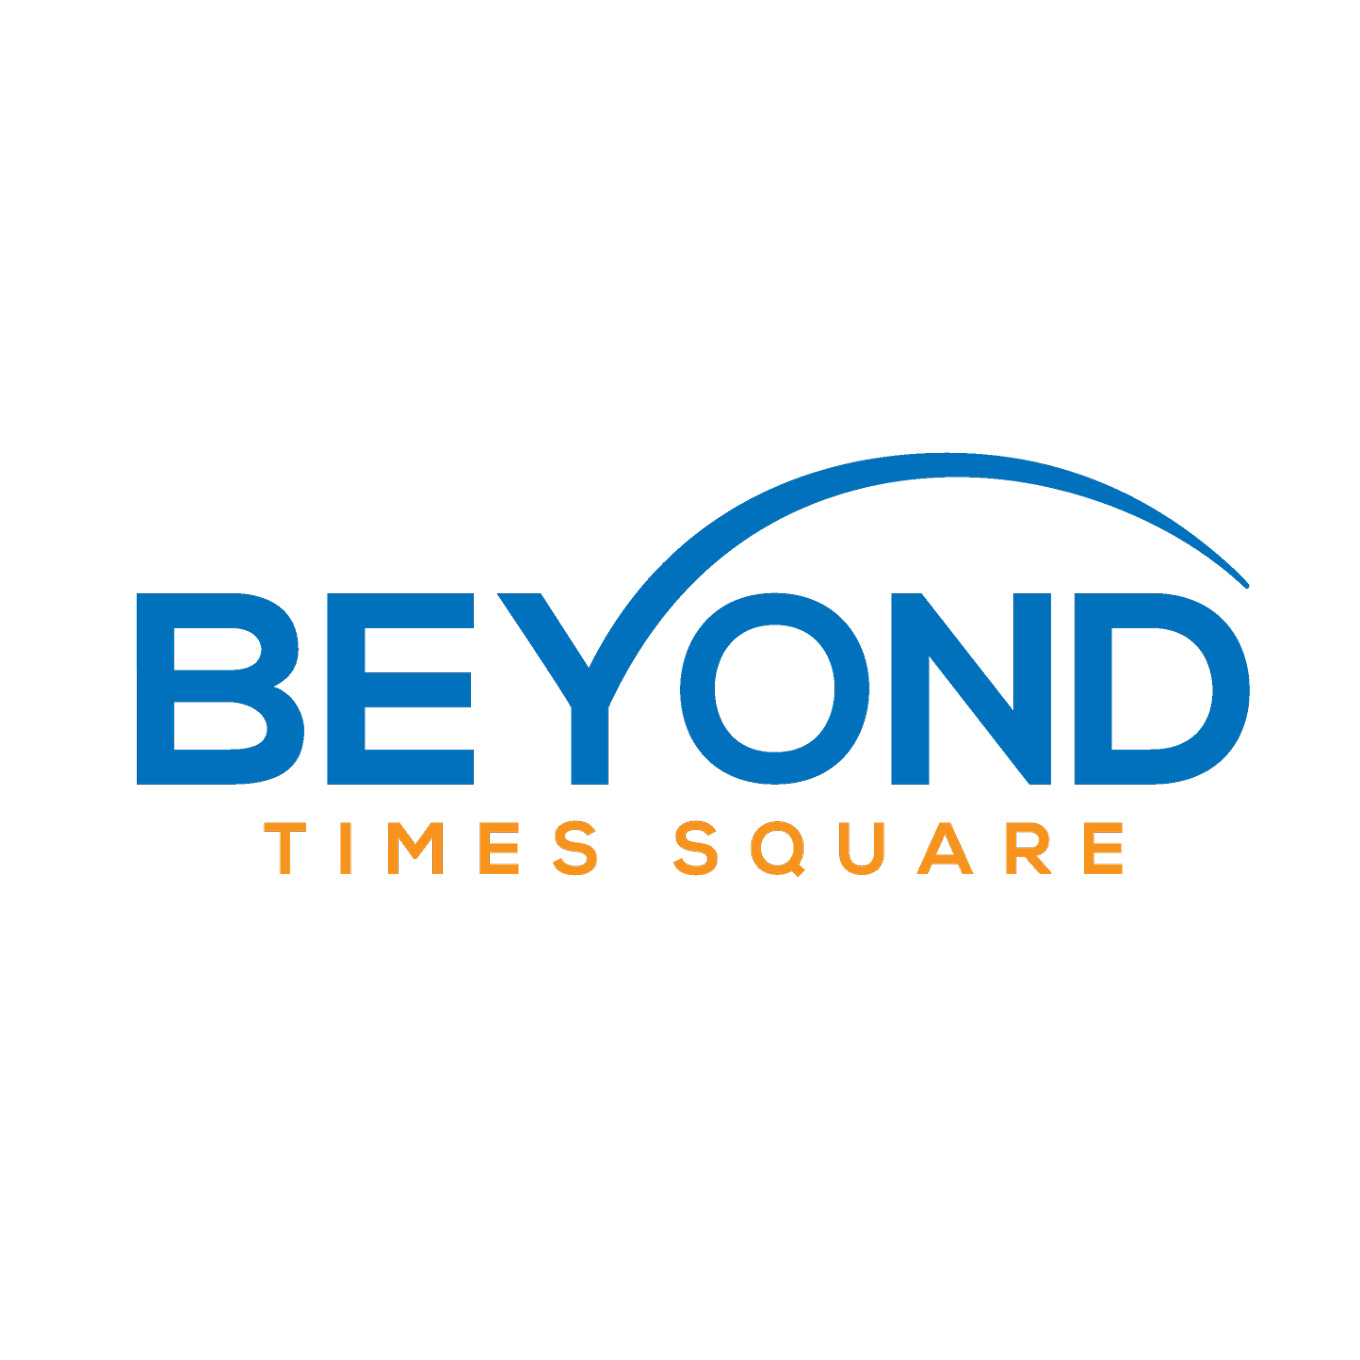 Beyond Times Square Launches New Logo to Embrace the Future of Luxury Travel